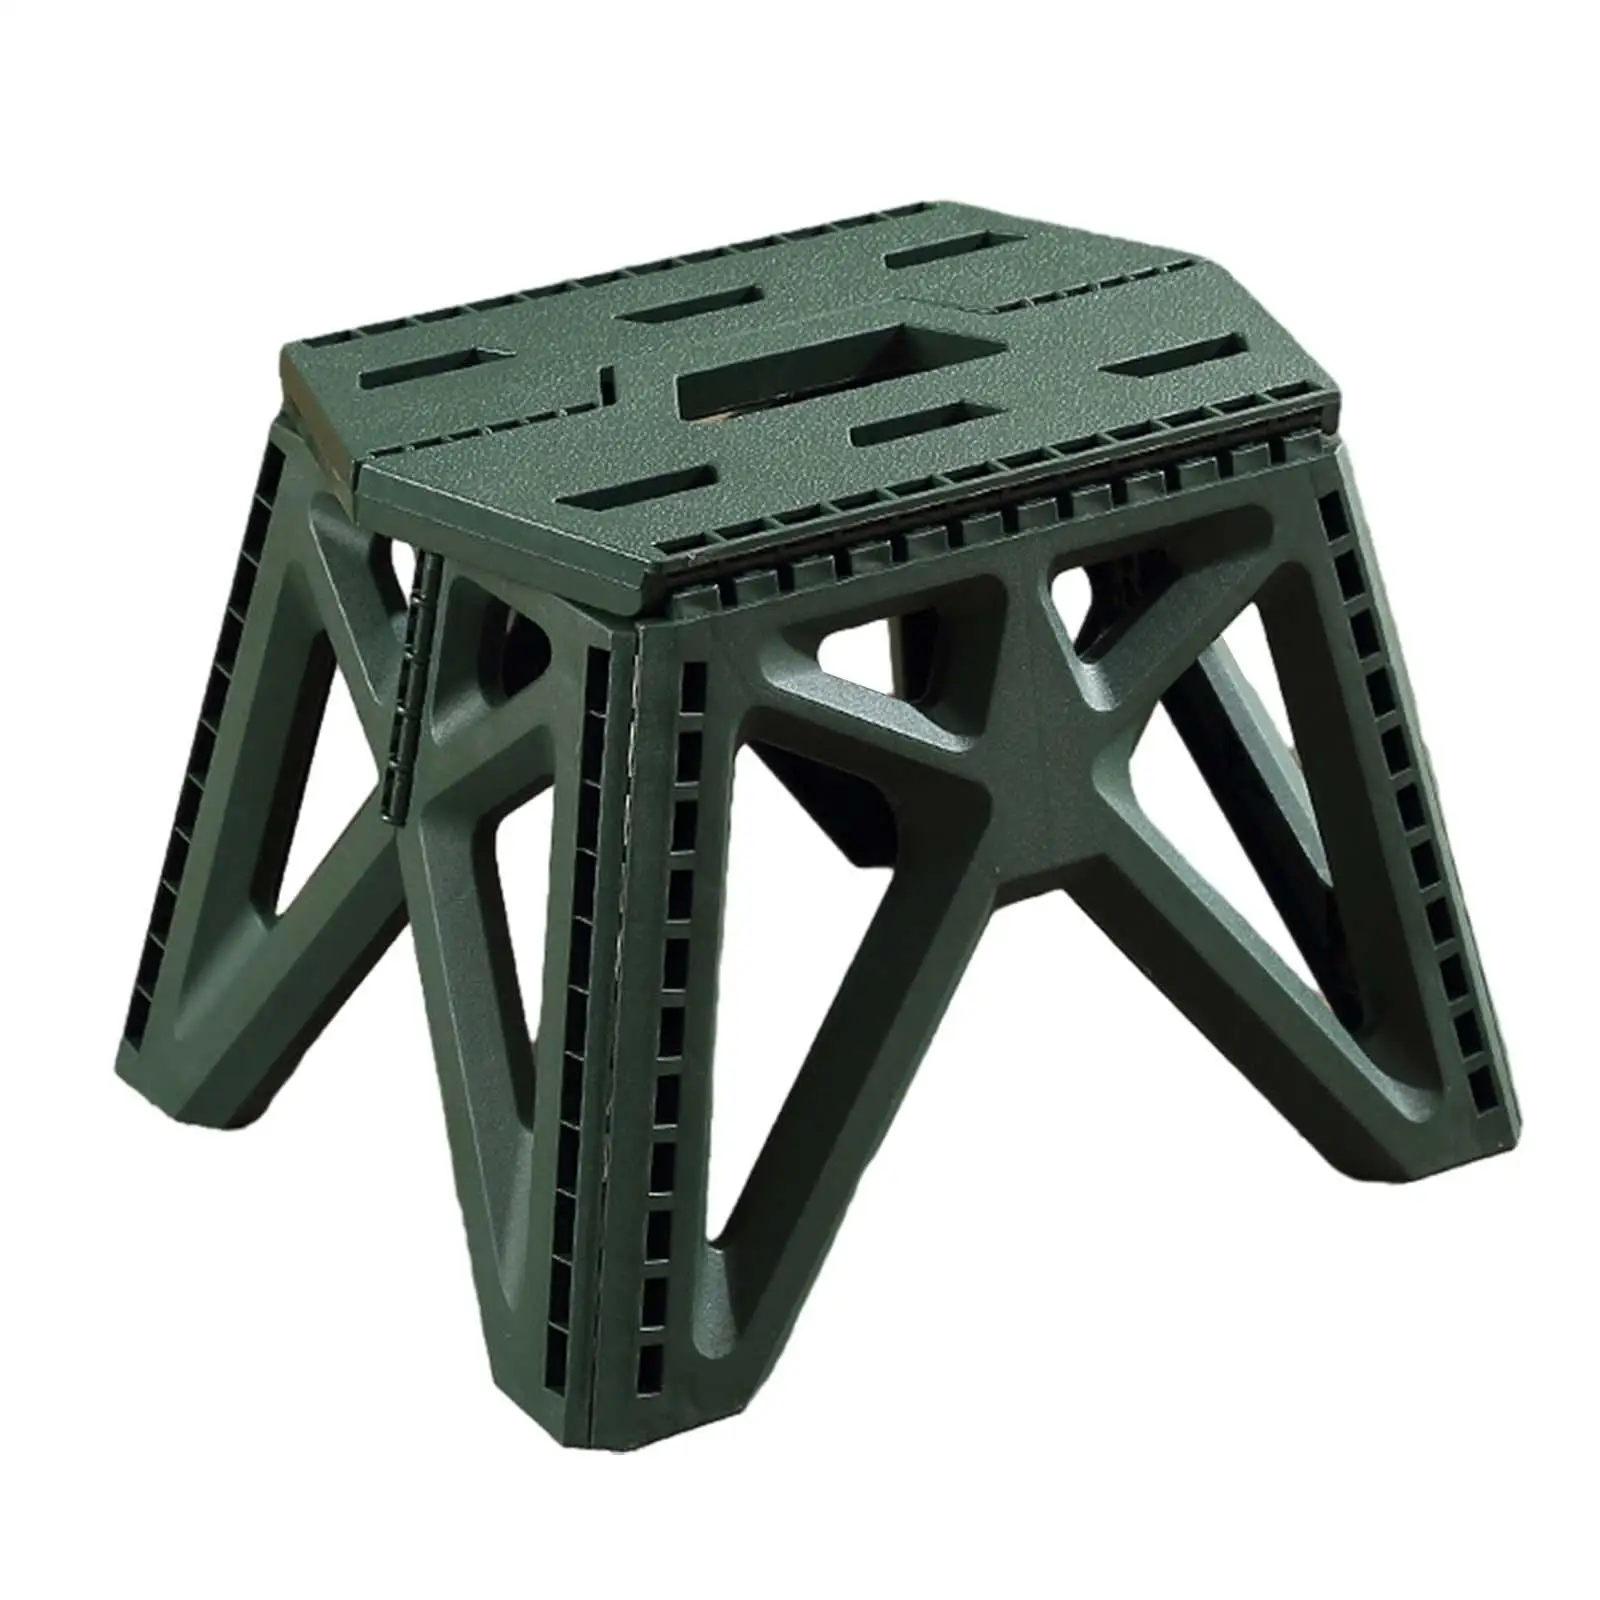 Folding Camping Stool, Collapsible Stool Foldable Stool, Camping Chair for Beach Garden Fishing Hiking Backpacking